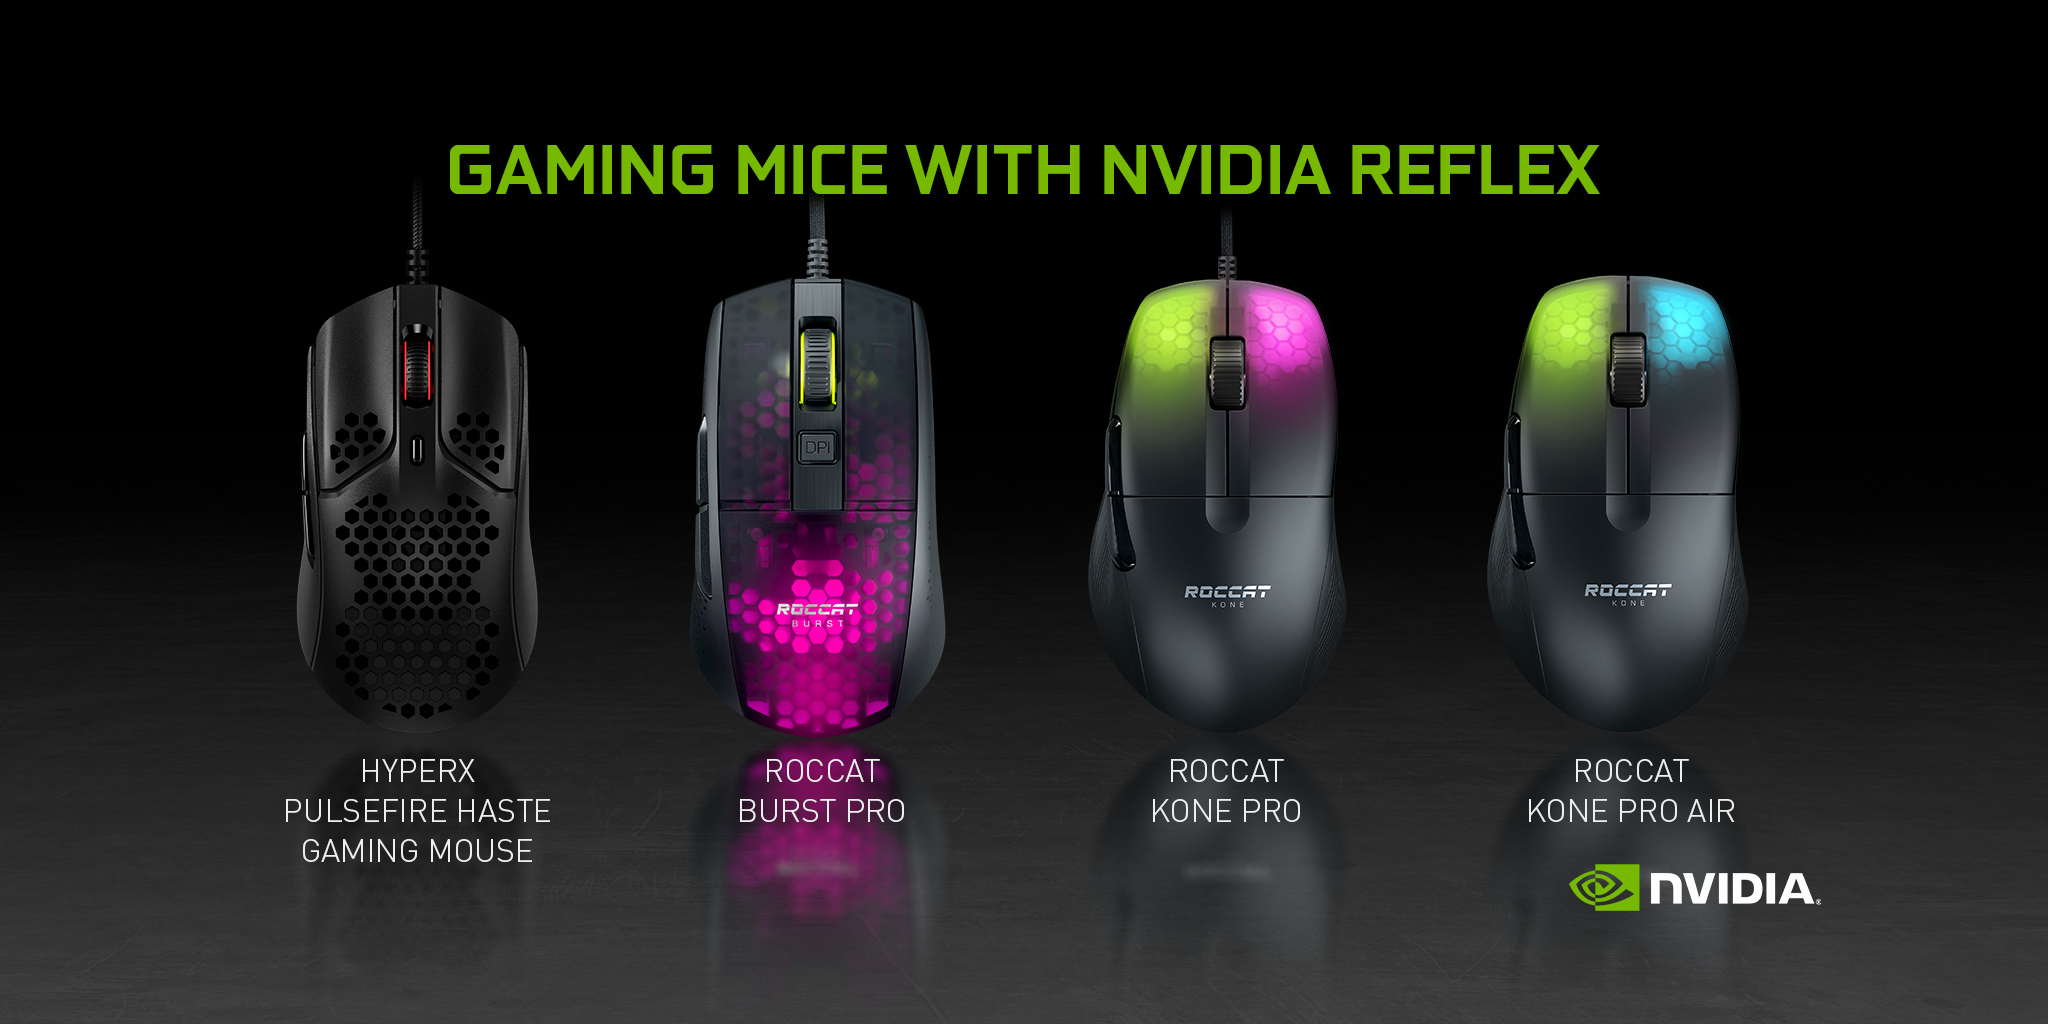 NVIDIA GeForce on X: Introducing four new NVIDIA Reflex compatible mice  from @HyperX and @ROCCAT: 🖱️ HyperX Pulsefire Haste 🖱️ ROCCAT Burst Pro  🖱️ ROCCAT Kone Pro 🖱️ ROCCAT Kone Pro Air #